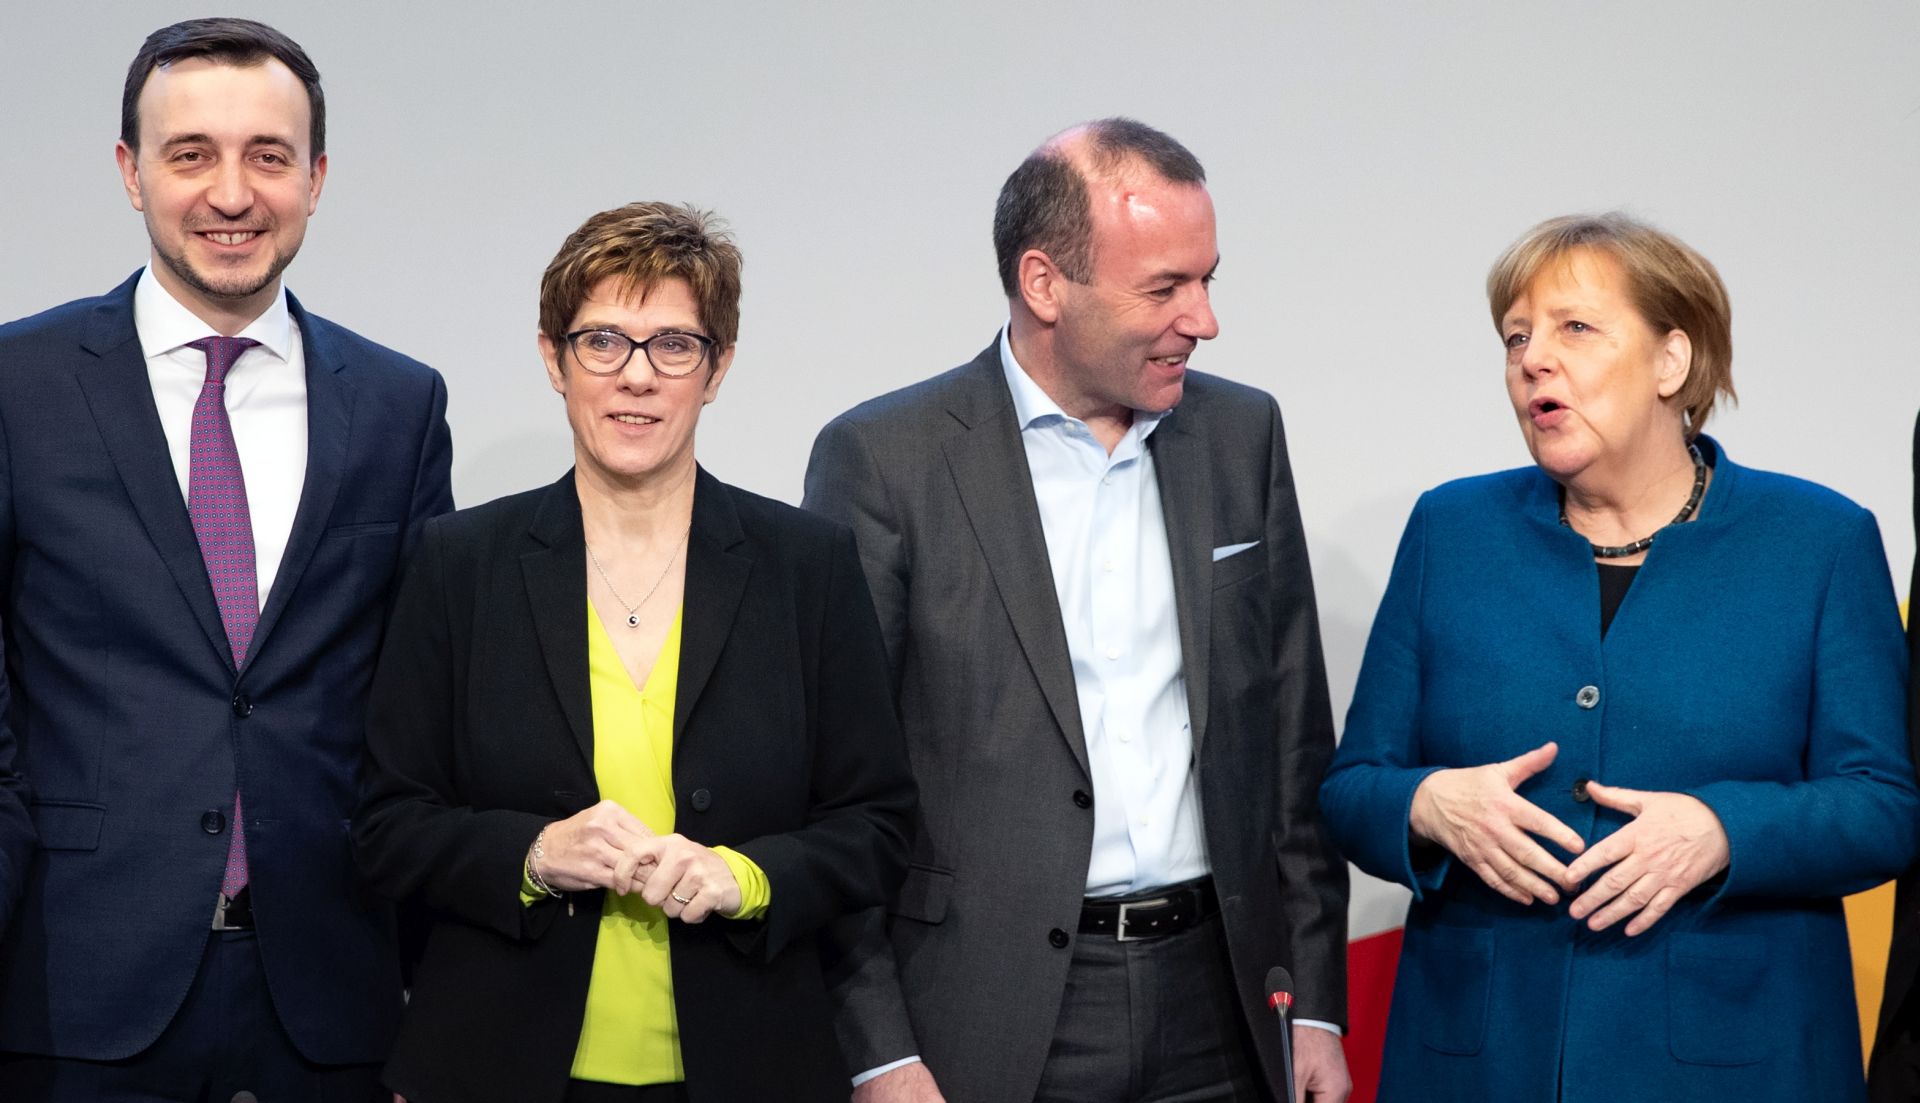 epa07282265 (L-R) Secretary General Paul Ziemiak, Christian Democratic Union (CDU) party chairwoman Annegret Kramp-Karrenbauer, European People's Party in the European Parliament Leader Manfred Weber and German Chancellor Angela Merkel during a party's executive board two-day retreat in Potsdam near Berlin, Germany, 14 January 2019. The CDU is expected to discuss upcoming elections, such as the European Parliament election and various regional elections.  EPA/HAYOUNG JEON